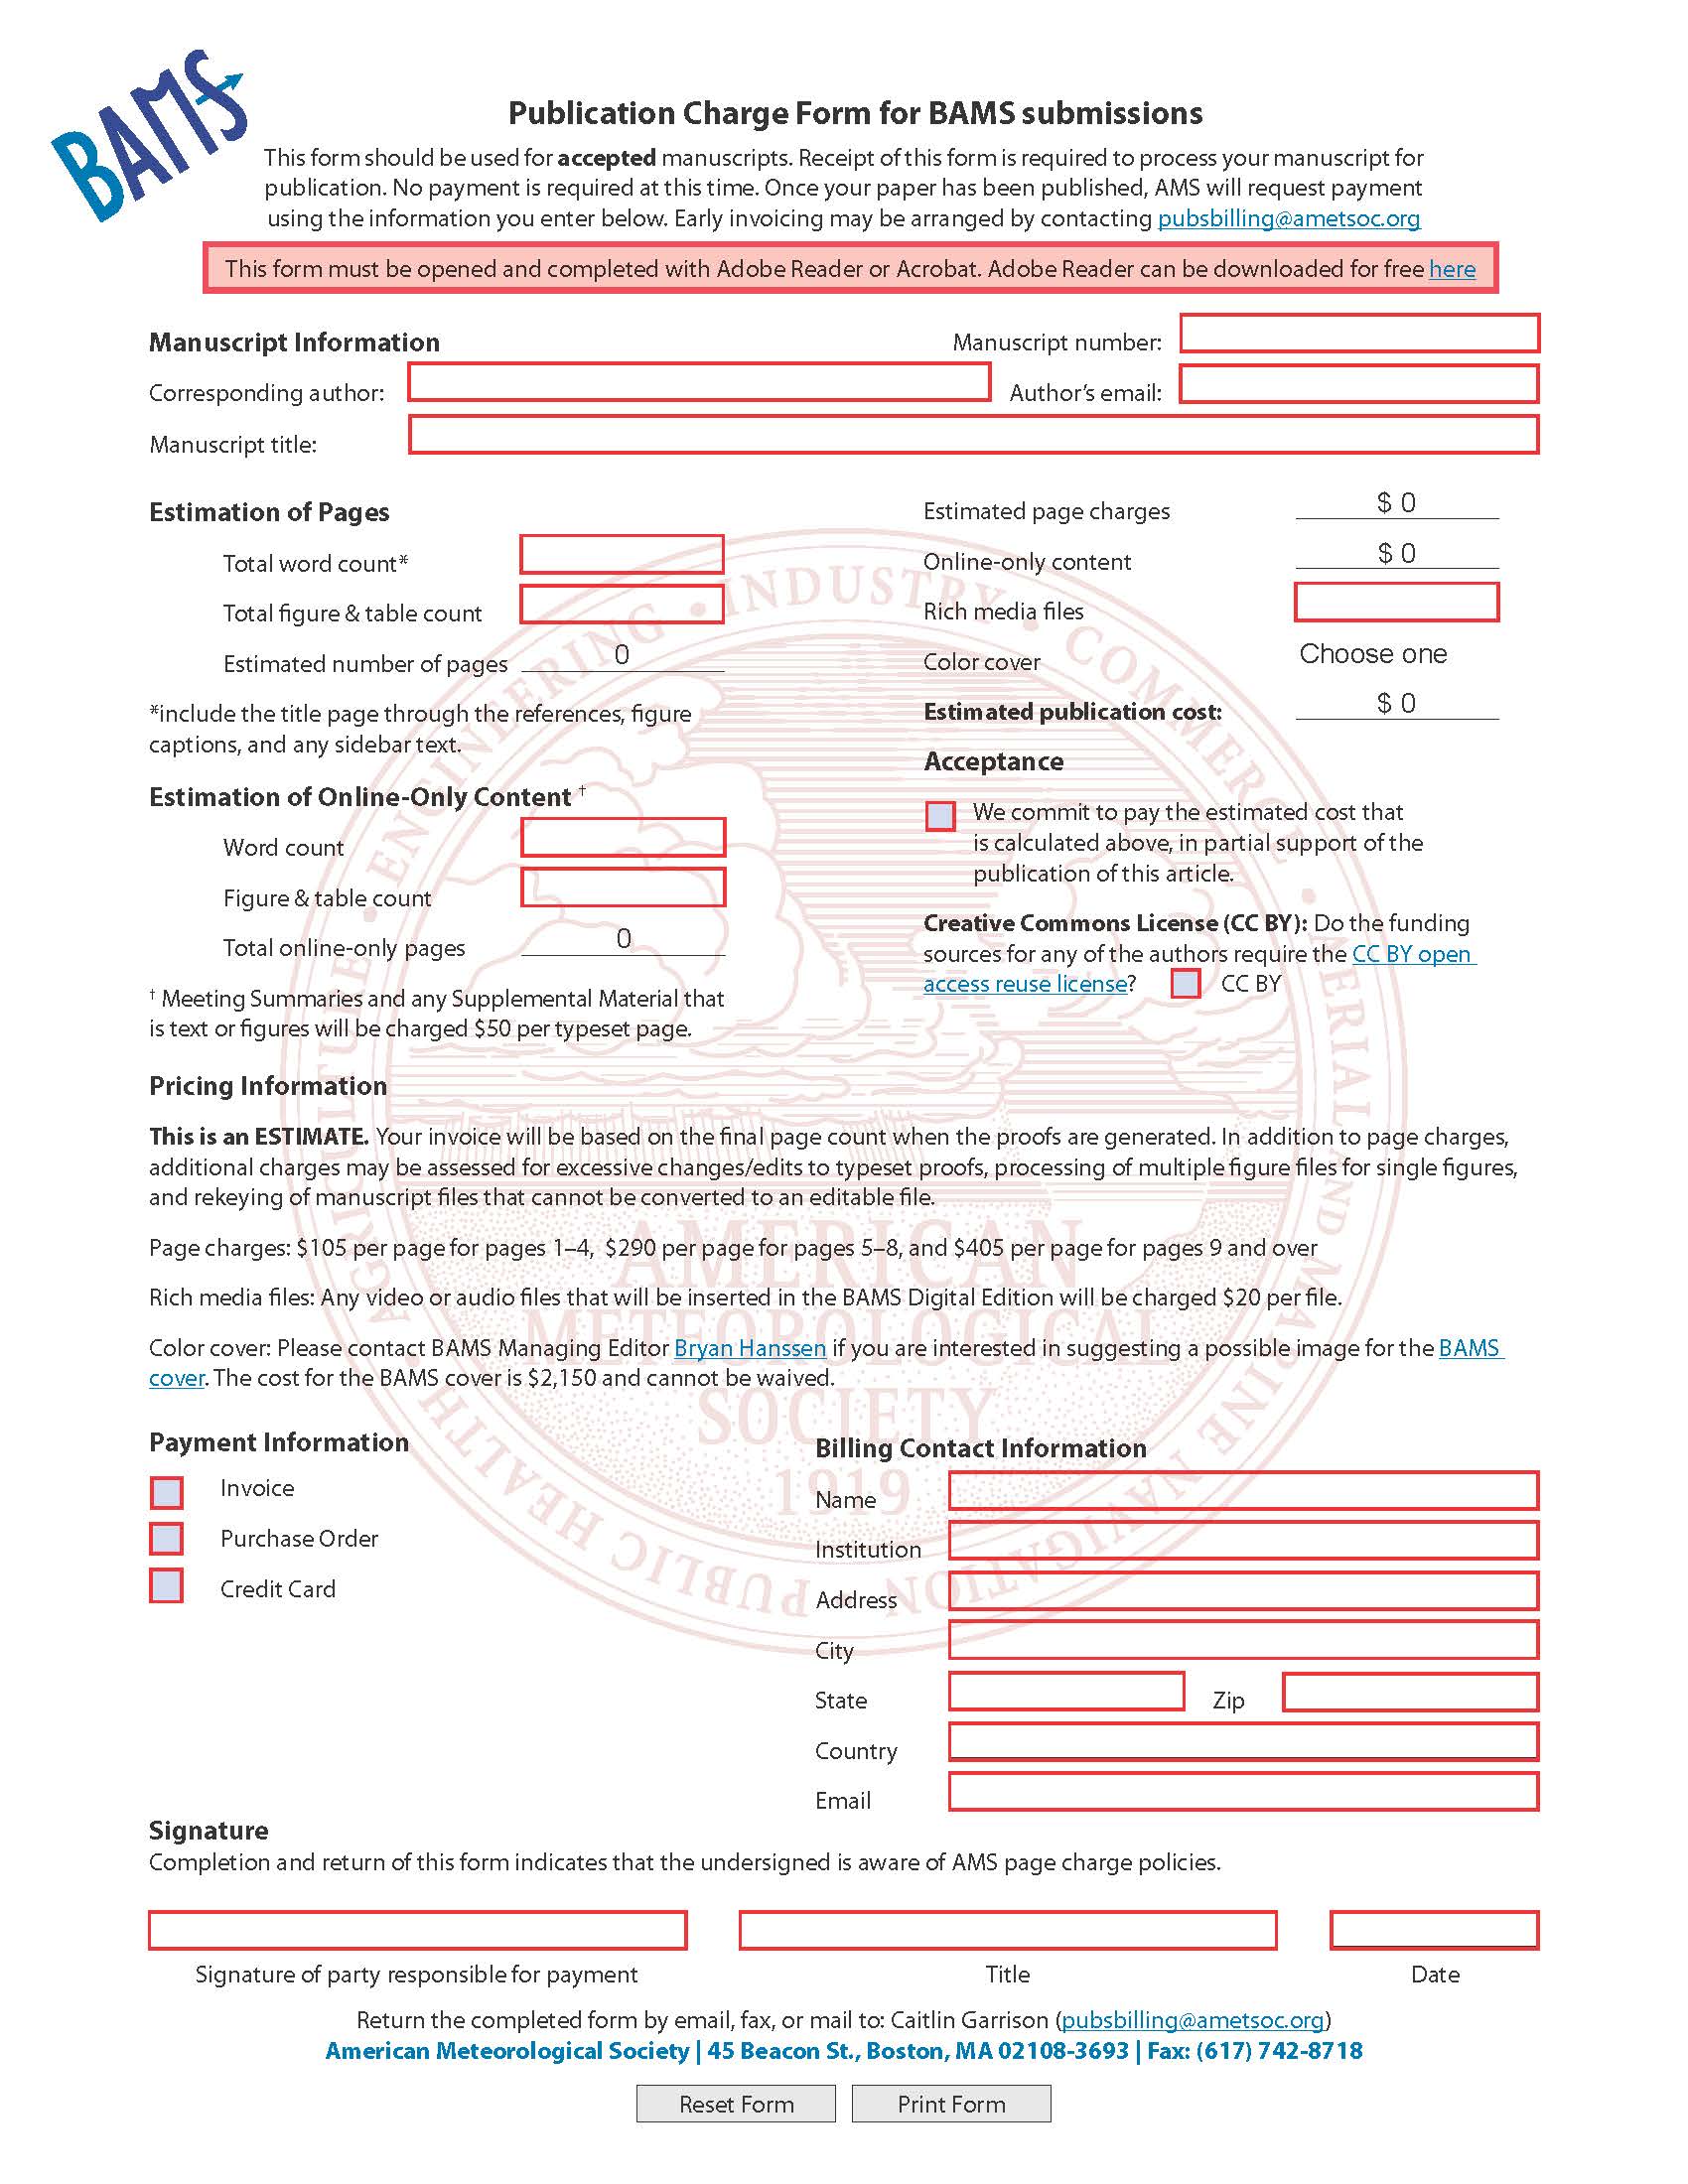 Download the BAMS Publication Charge Form as a PDF